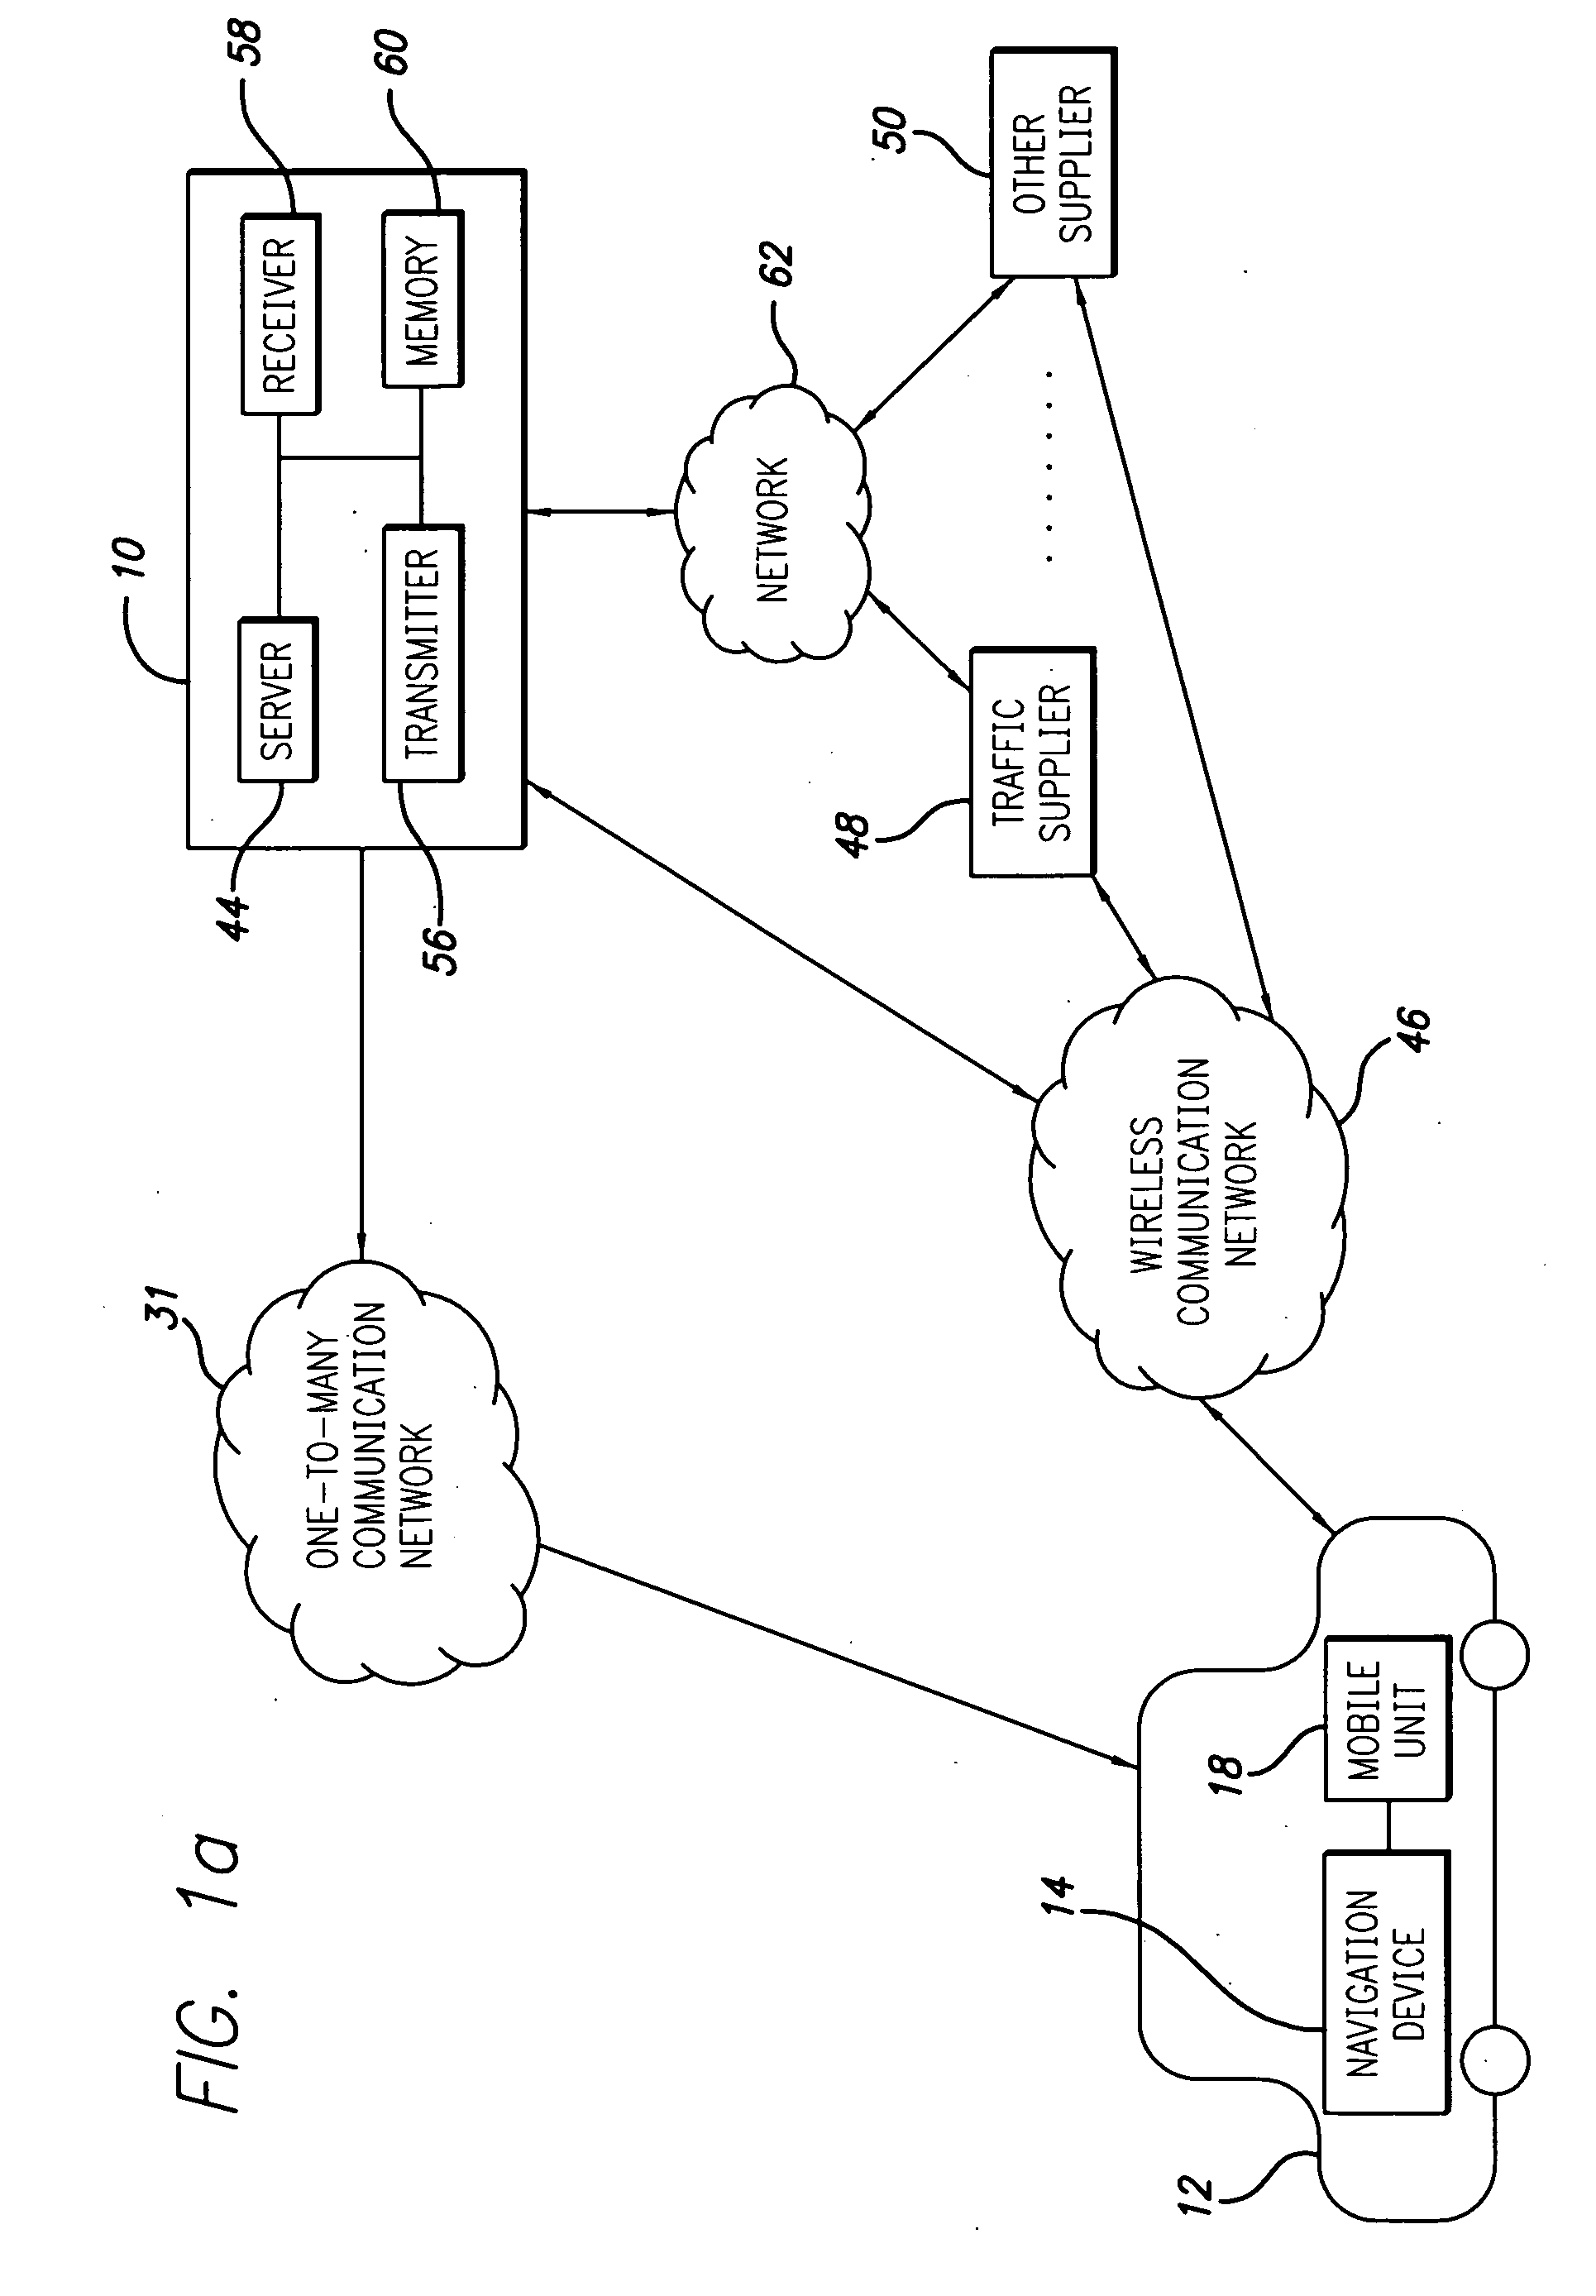 Display method and system for a vehicle navigation system